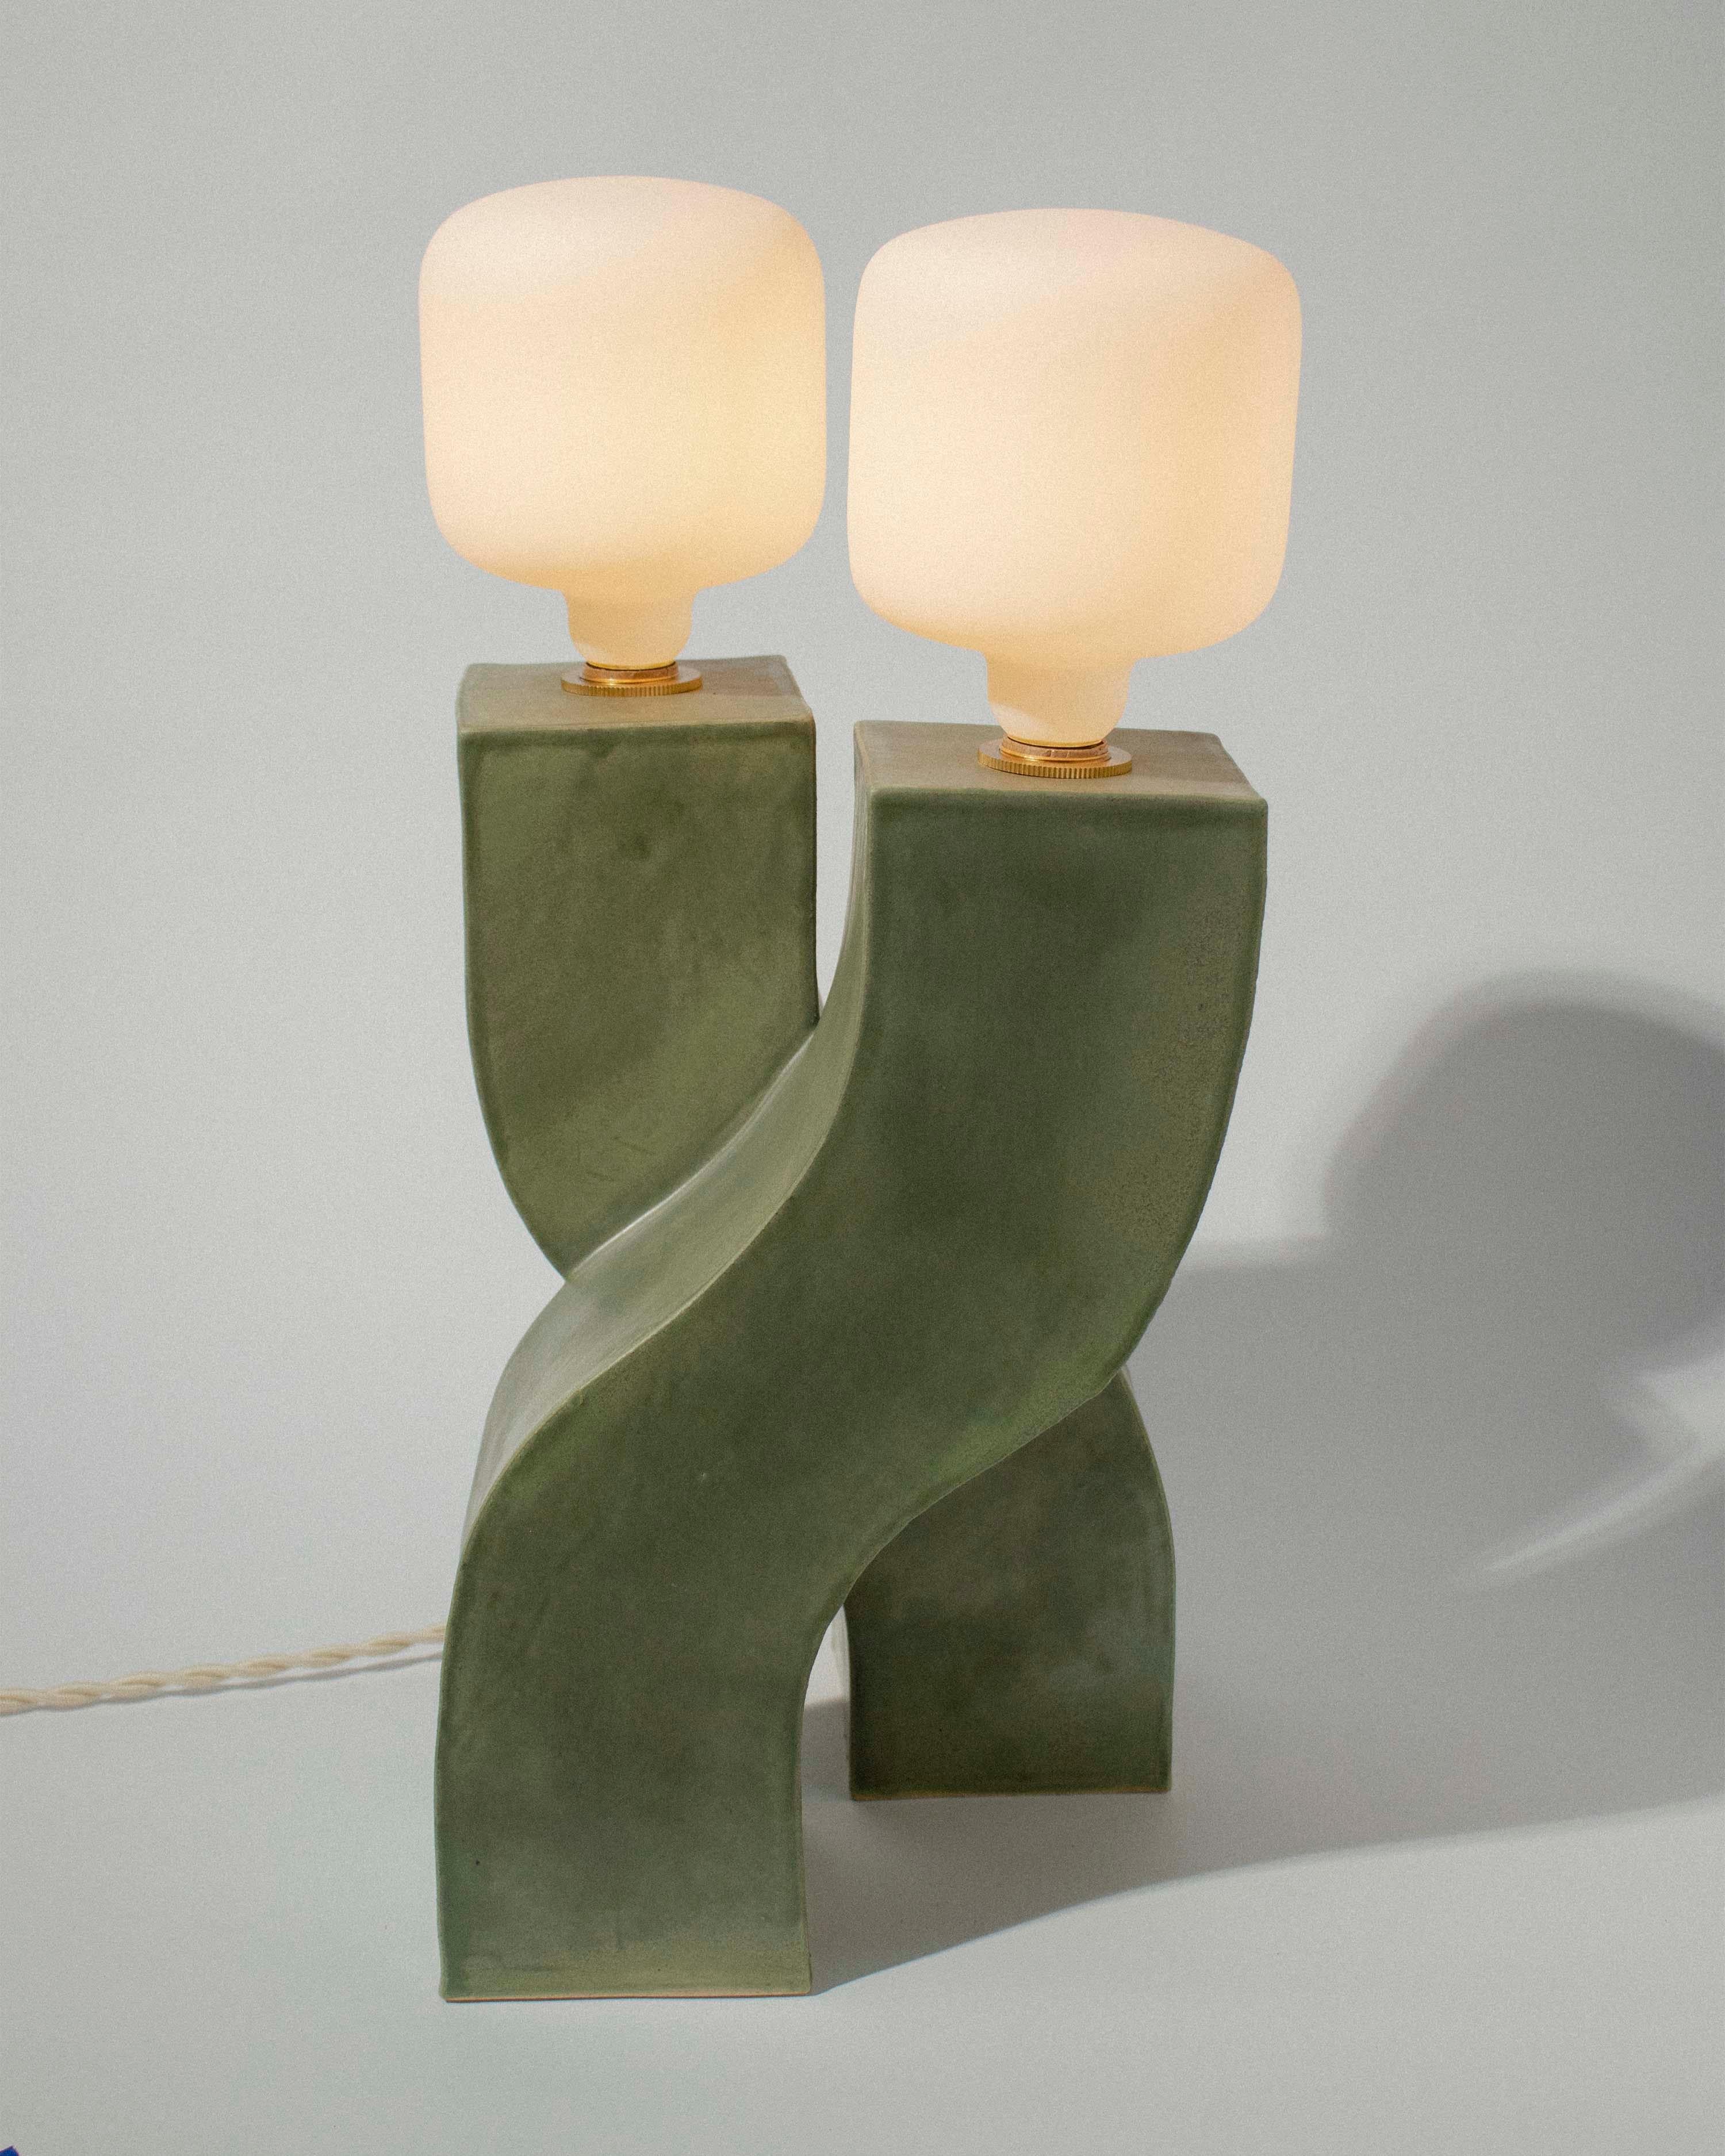 Created by Ethan Streicher, founder of Streicher Goods, located in Brooklyn, NY. 
Each Helix lamp is hand-built using stoneware and slab building methods. 

The Helix lamp is comprised and supported by two elegantly conjoined S-shaped pieces,